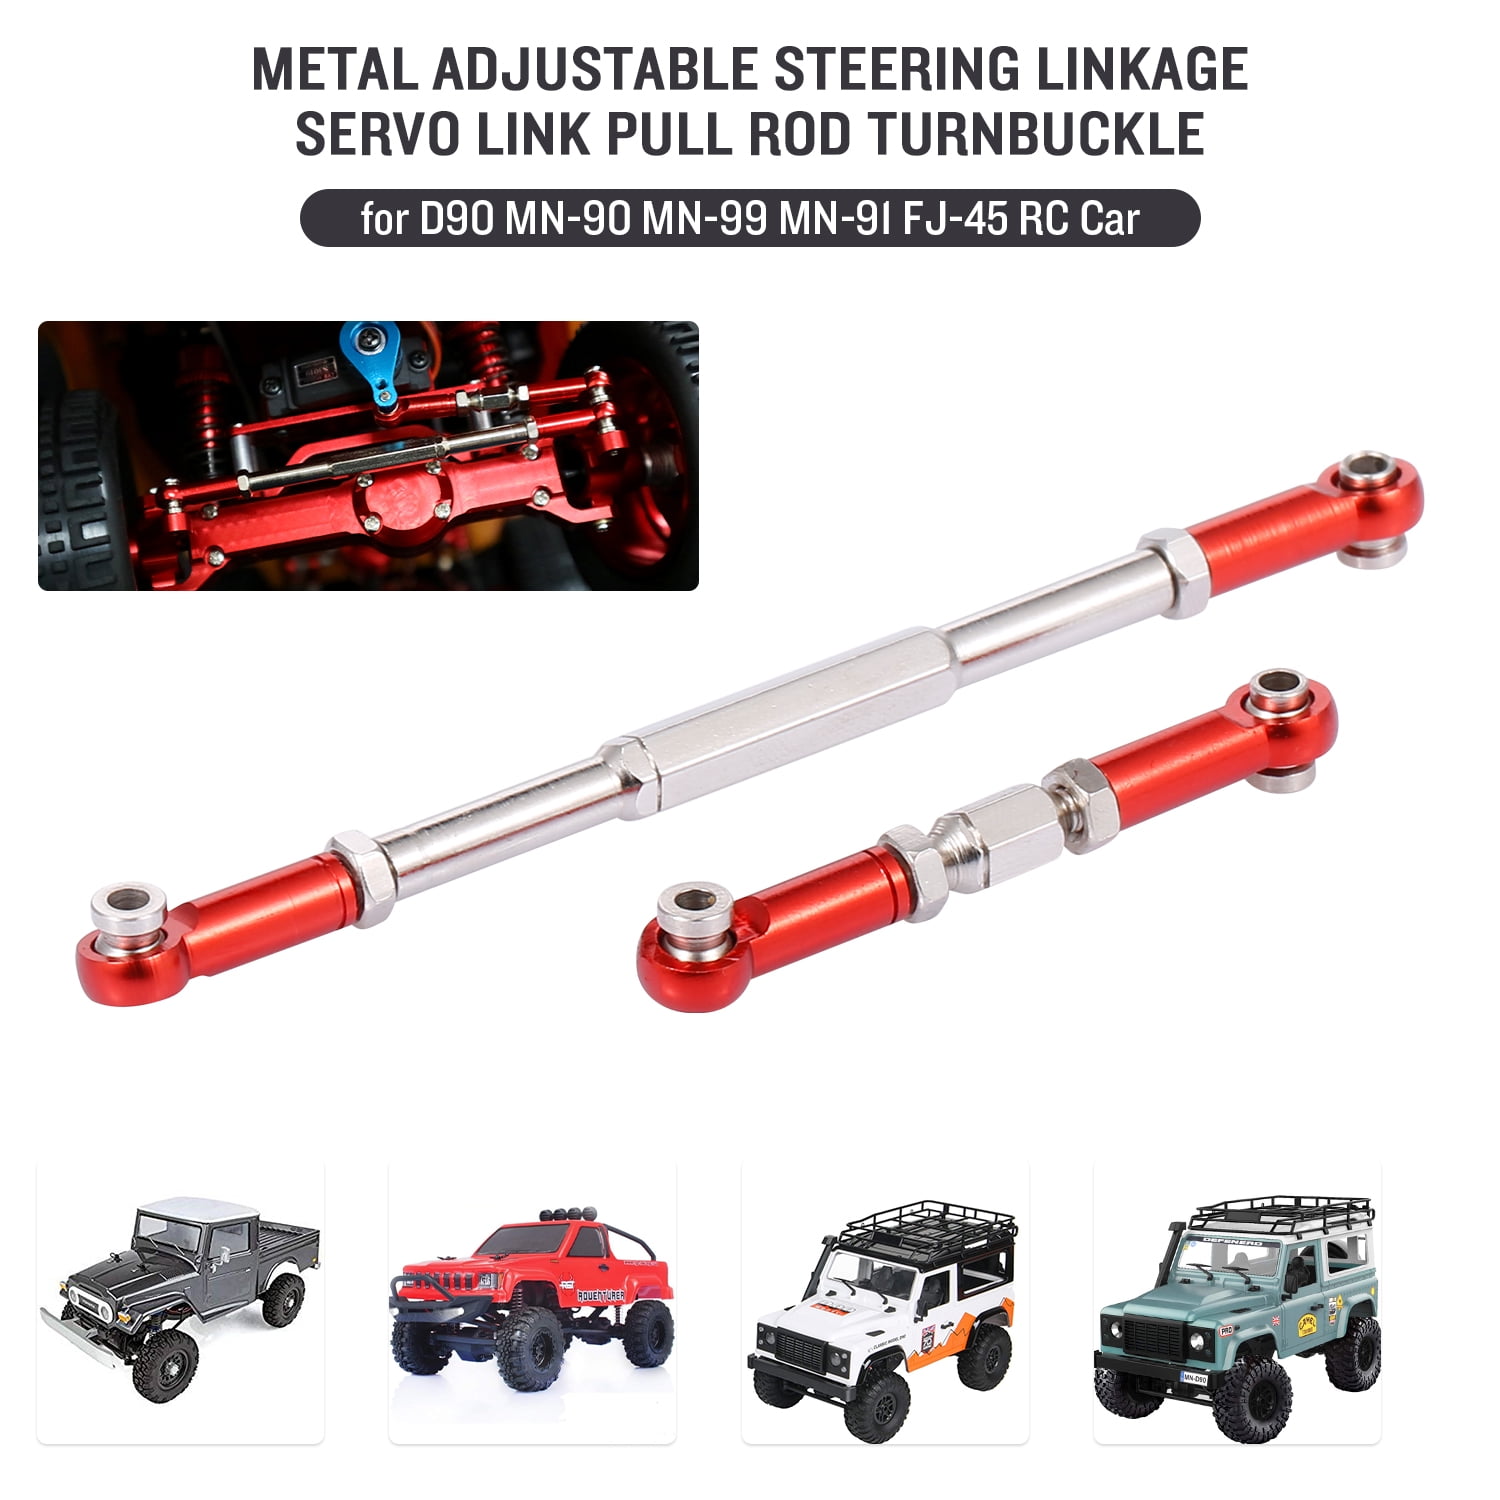 Aluminum Steering Linkage Pull Rod Replacement for Wltoys RC Car Accessory 